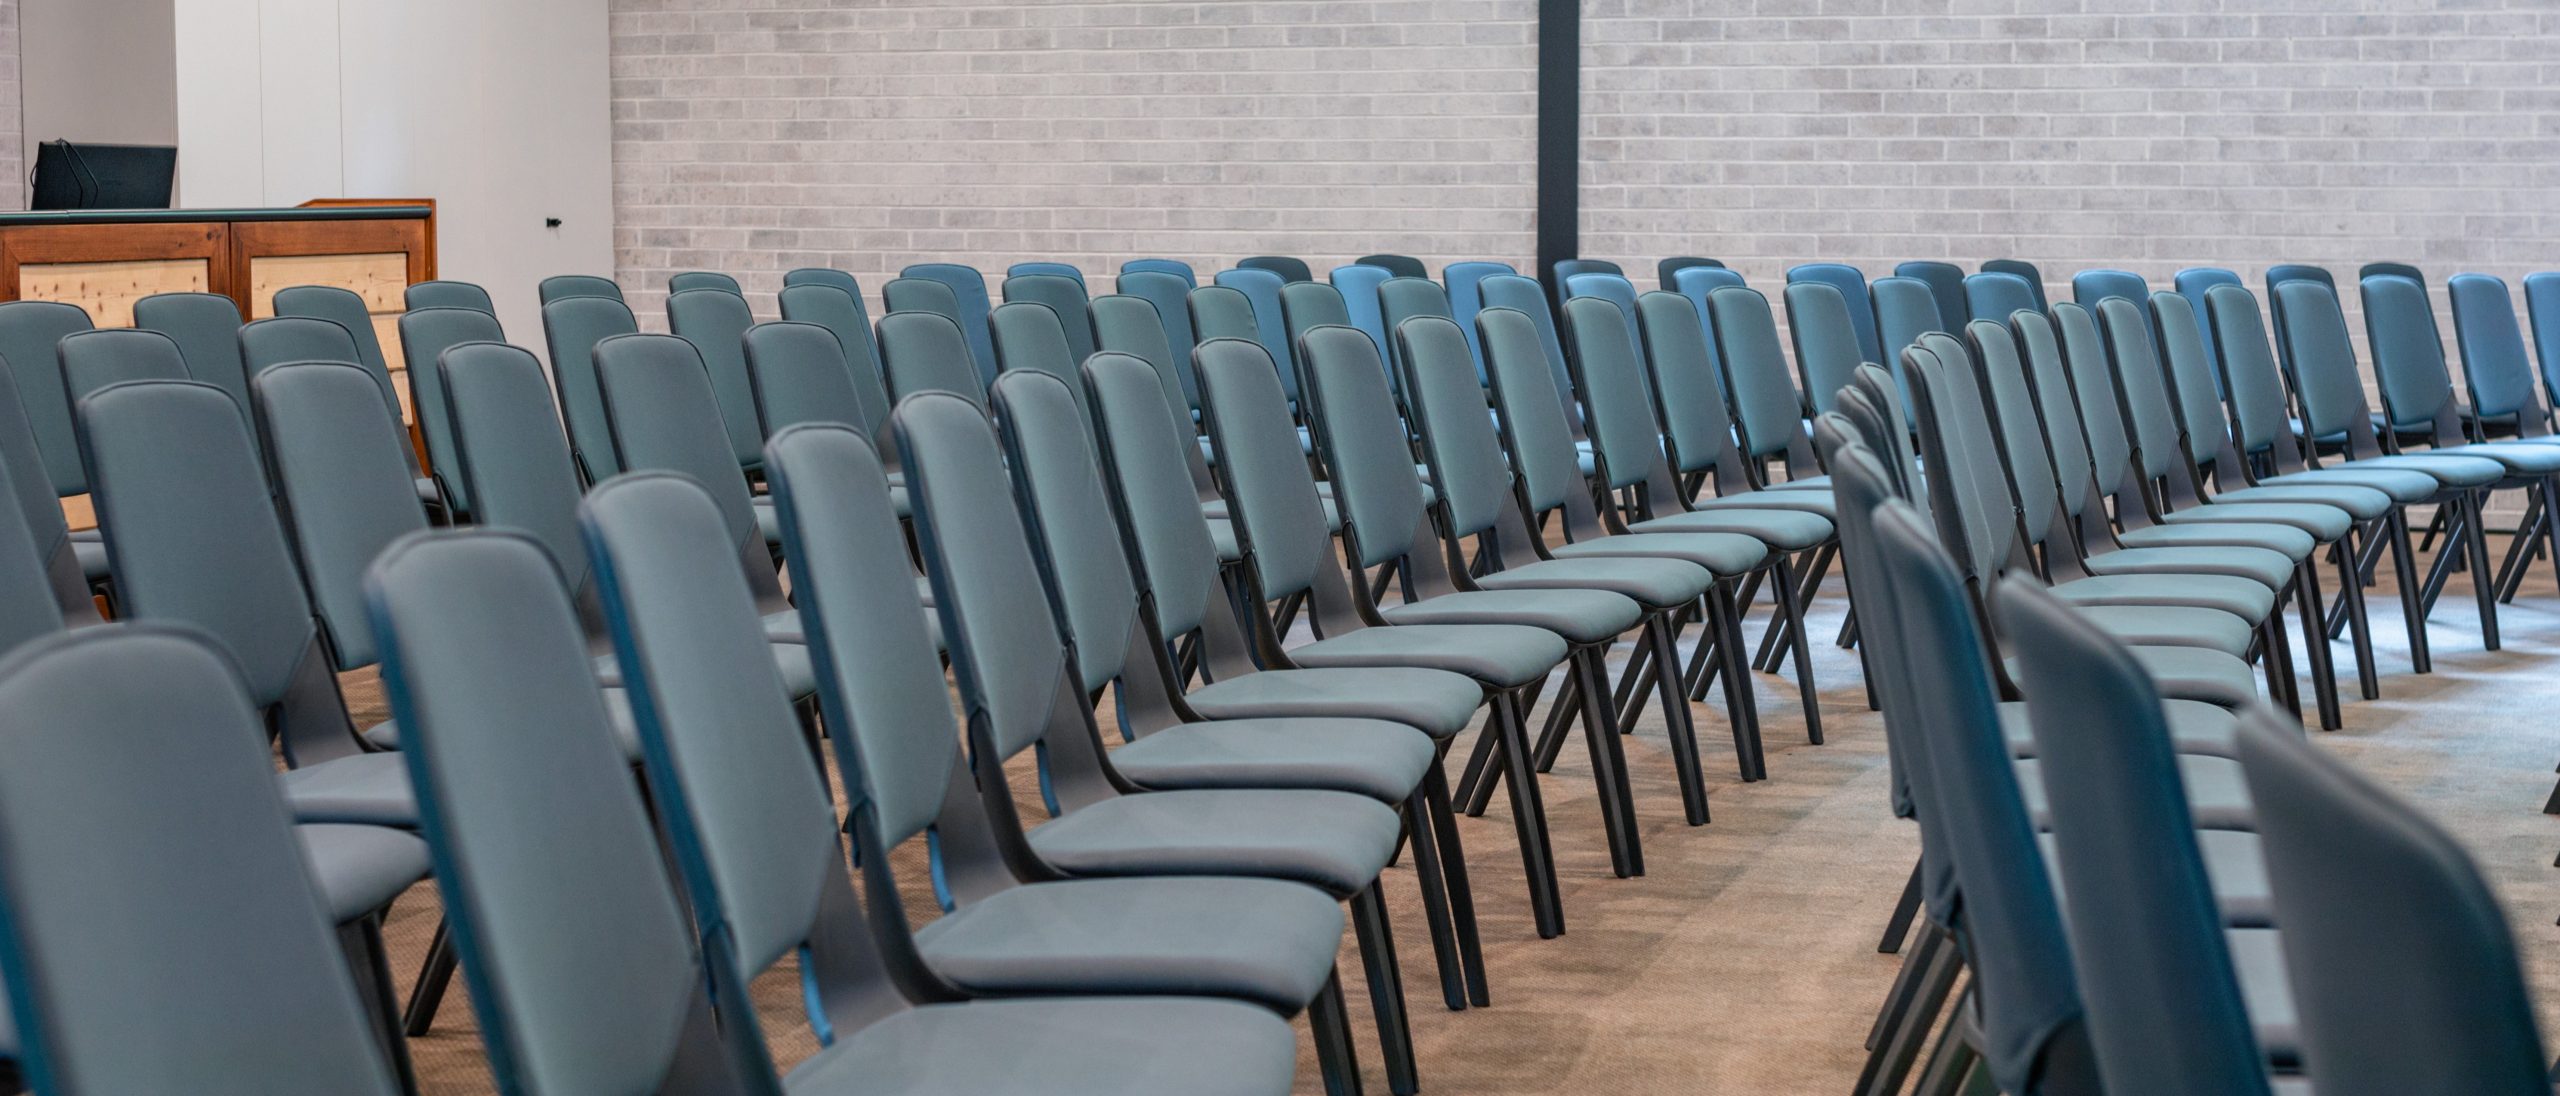 Many comfortable chairs are lined up in the LPCC auditorium, which can be used for various meetings and seminars.